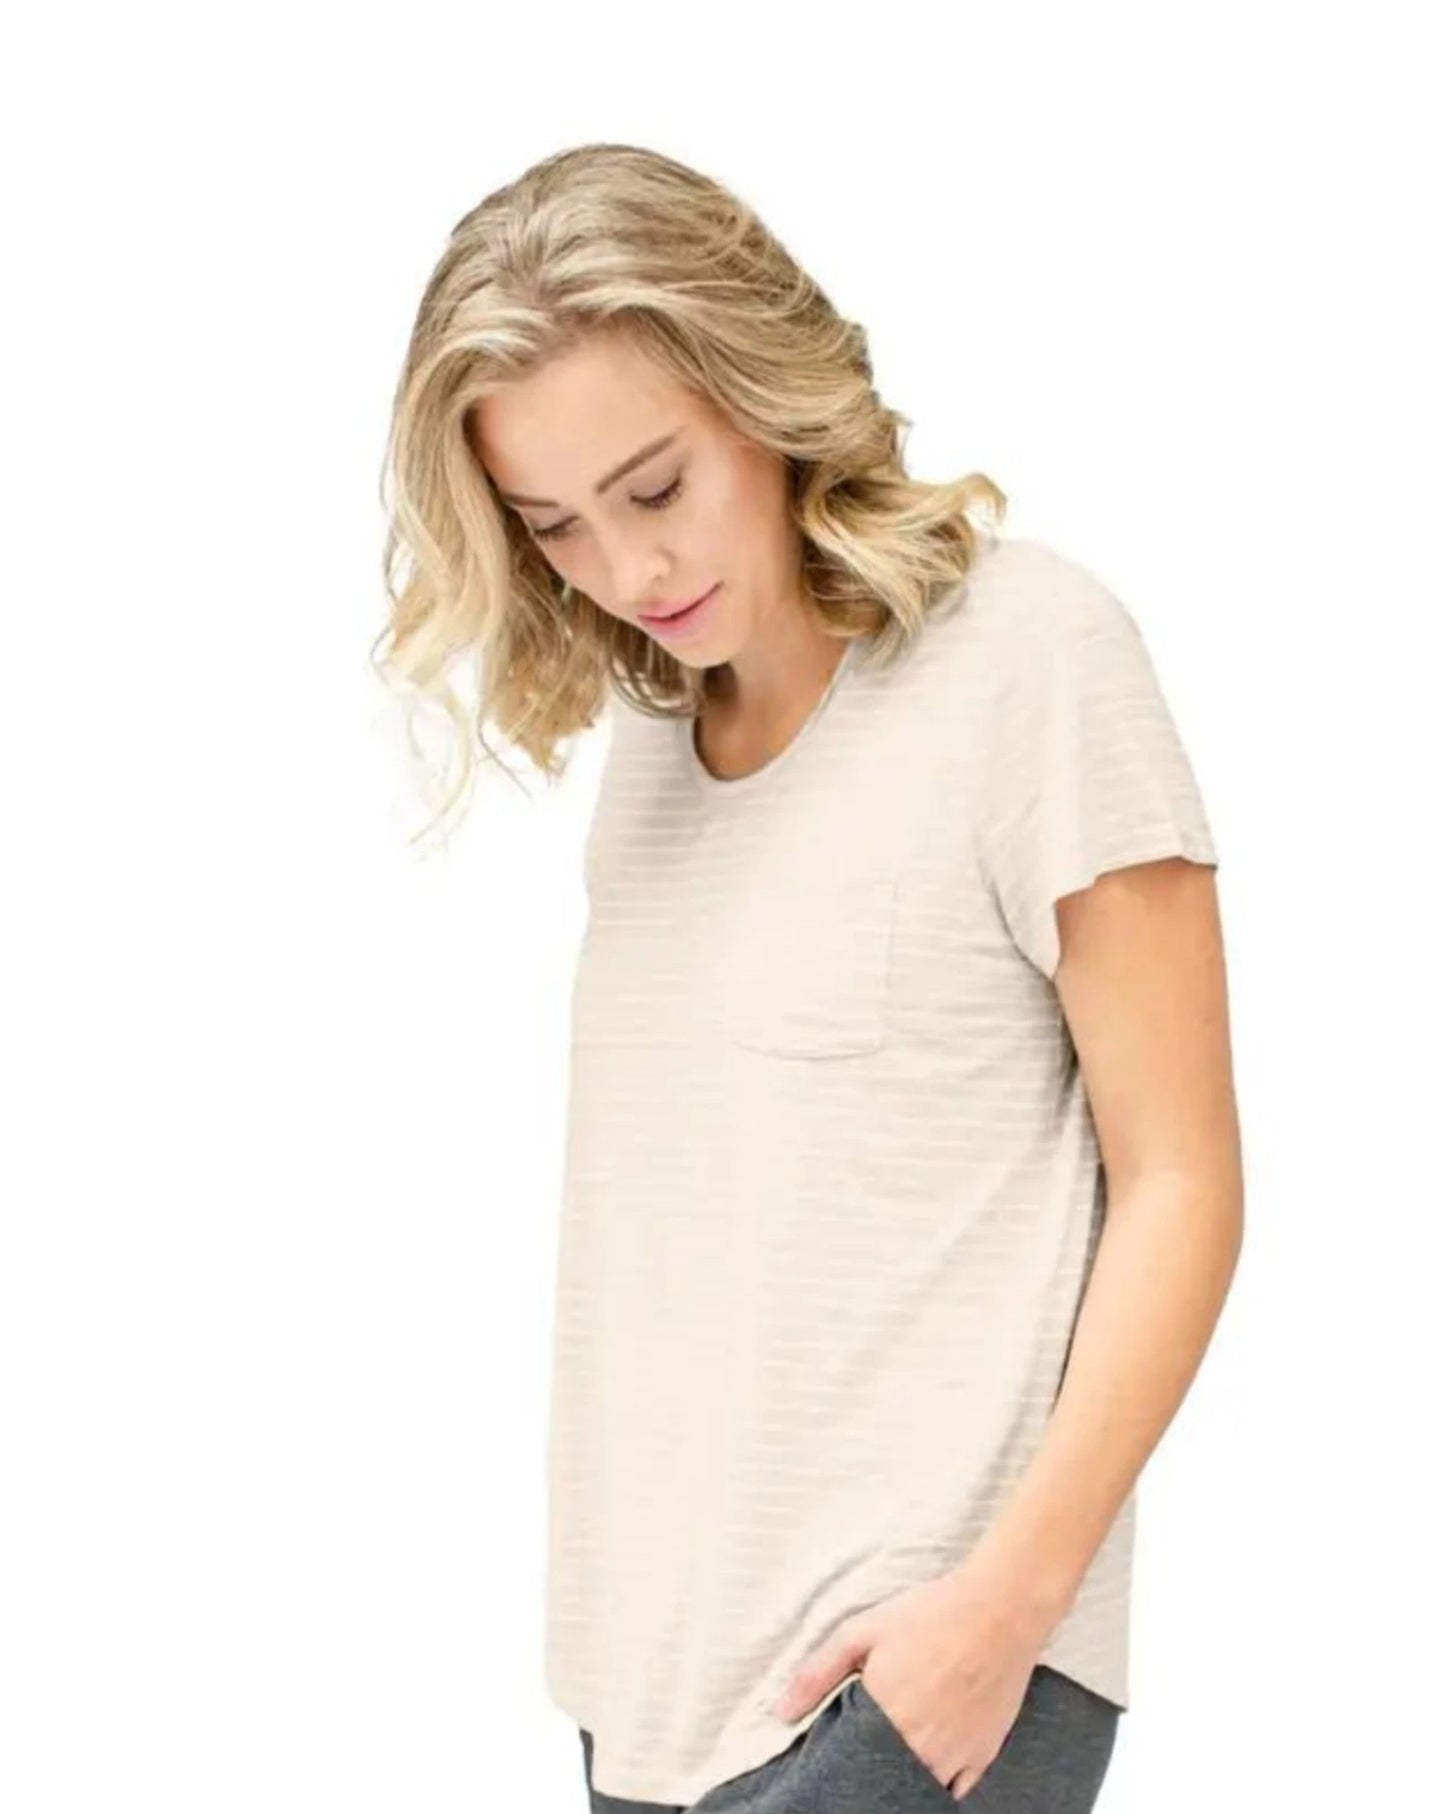 Kindred Bravely Everyday Nursing & Maternity T-shirt - Mama + Fawn Co.-